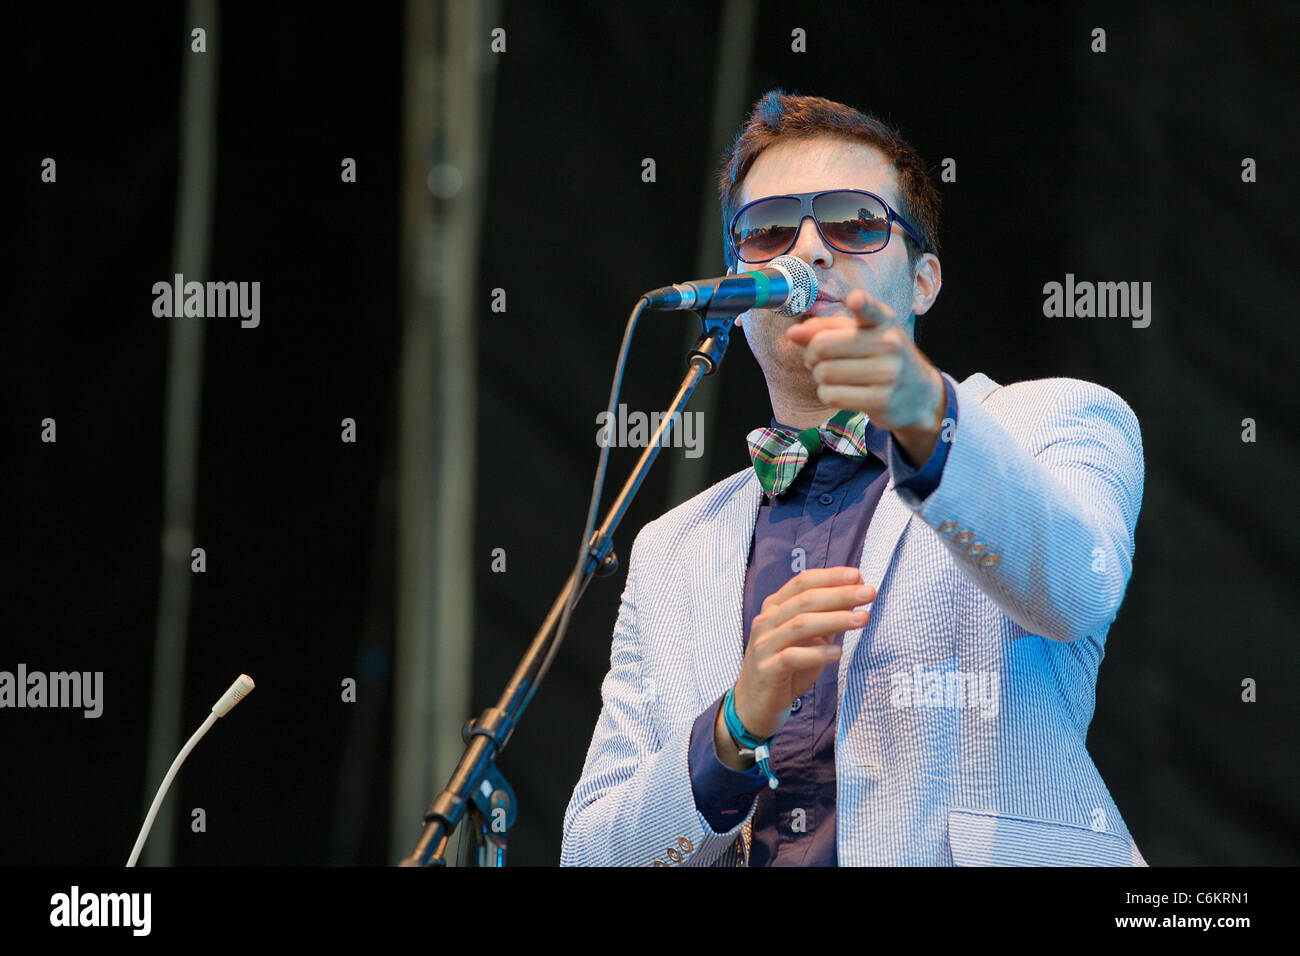 Mayer Hawthorne, performing at the 16th Festival SuperBock SuperRock - Day 1 Meco, Portugal - 16.07.10 Stock Photo